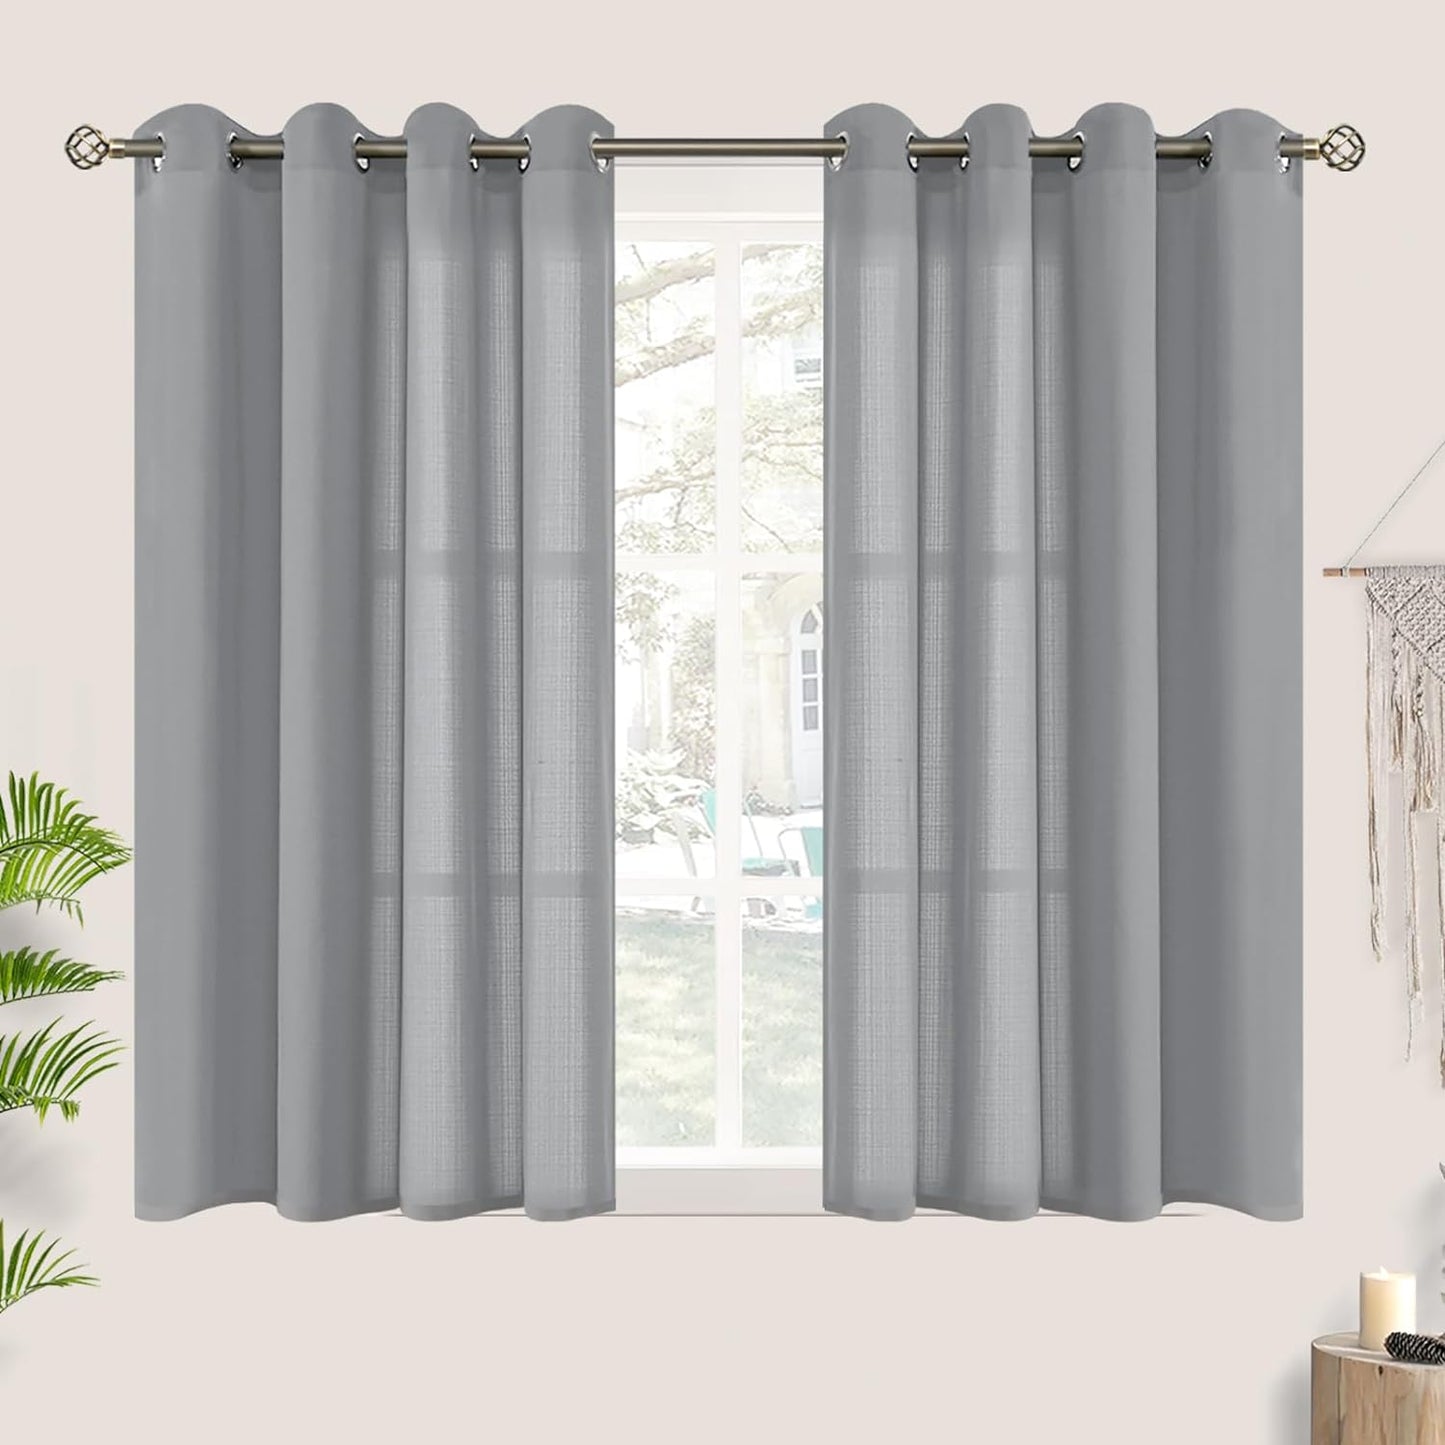 Bgment Natural Linen Look Semi Sheer Curtains for Bedroom, 52 X 54 Inch White Grommet Light Filtering Casual Textured Privacy Curtains for Bay Window, 2 Panels  BGment Grey 52W X 45L 